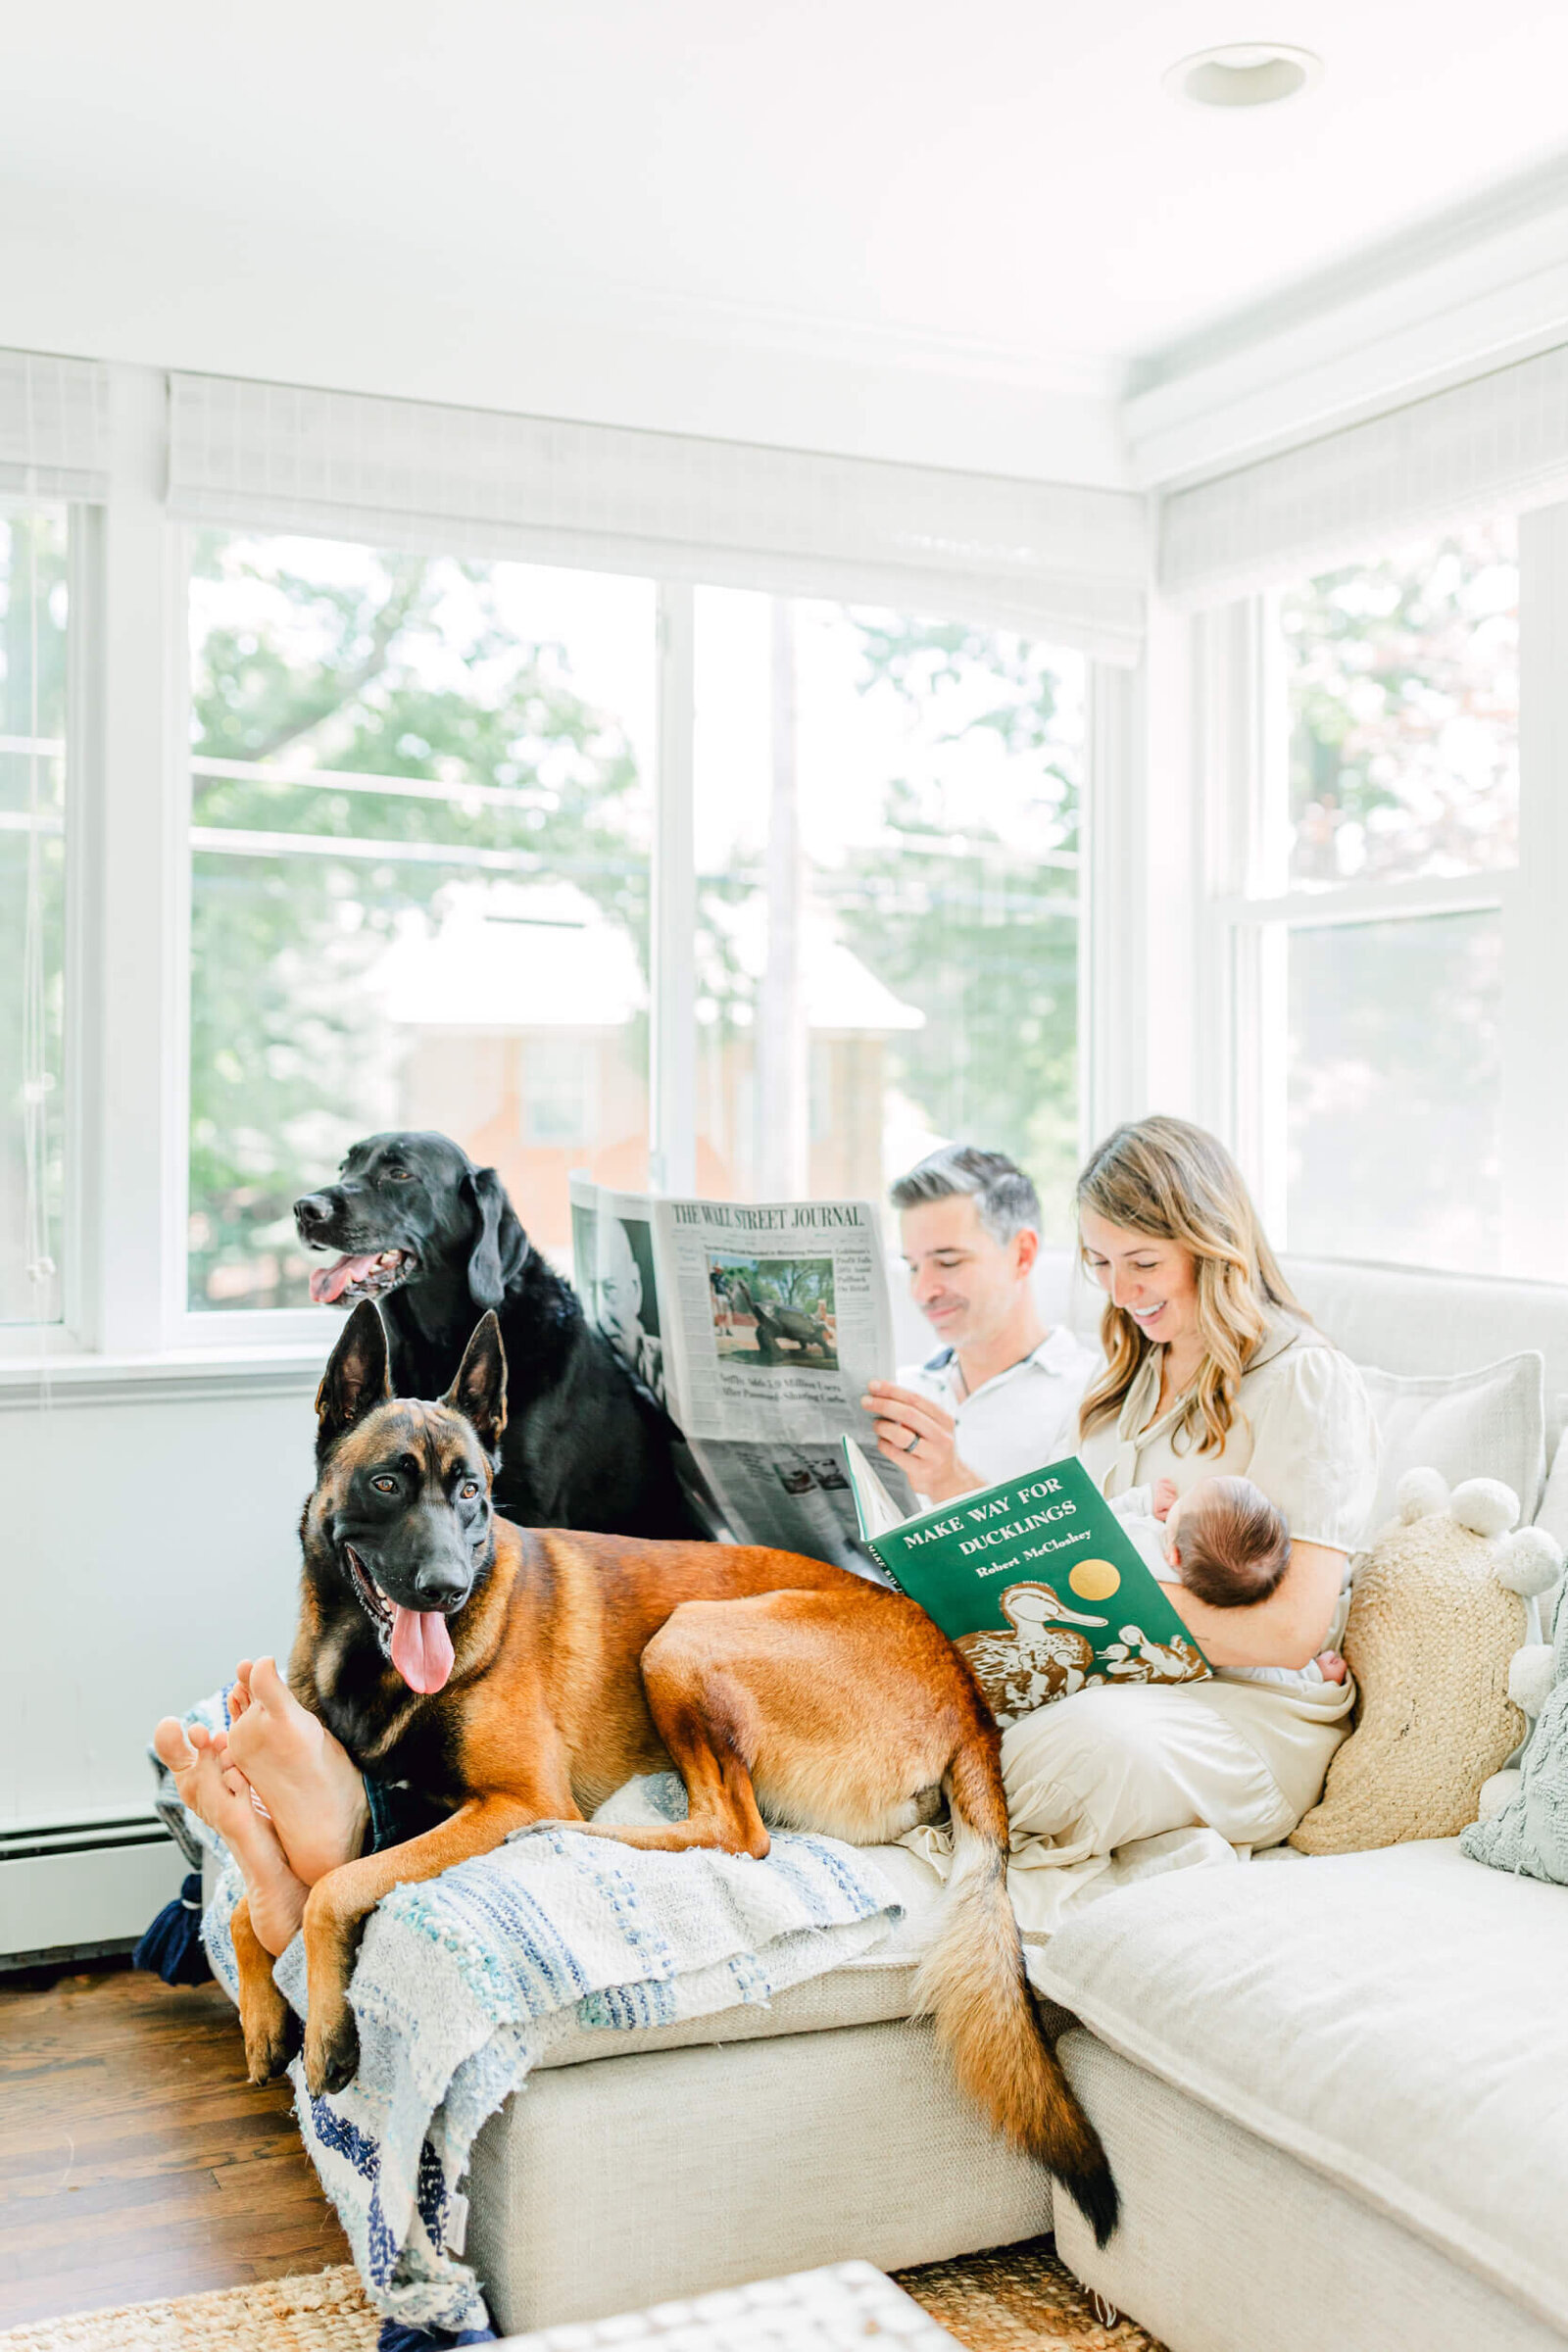 Mom and dad read next to each other on a couch with mom holding their newborn and two dogs sitting at their feet